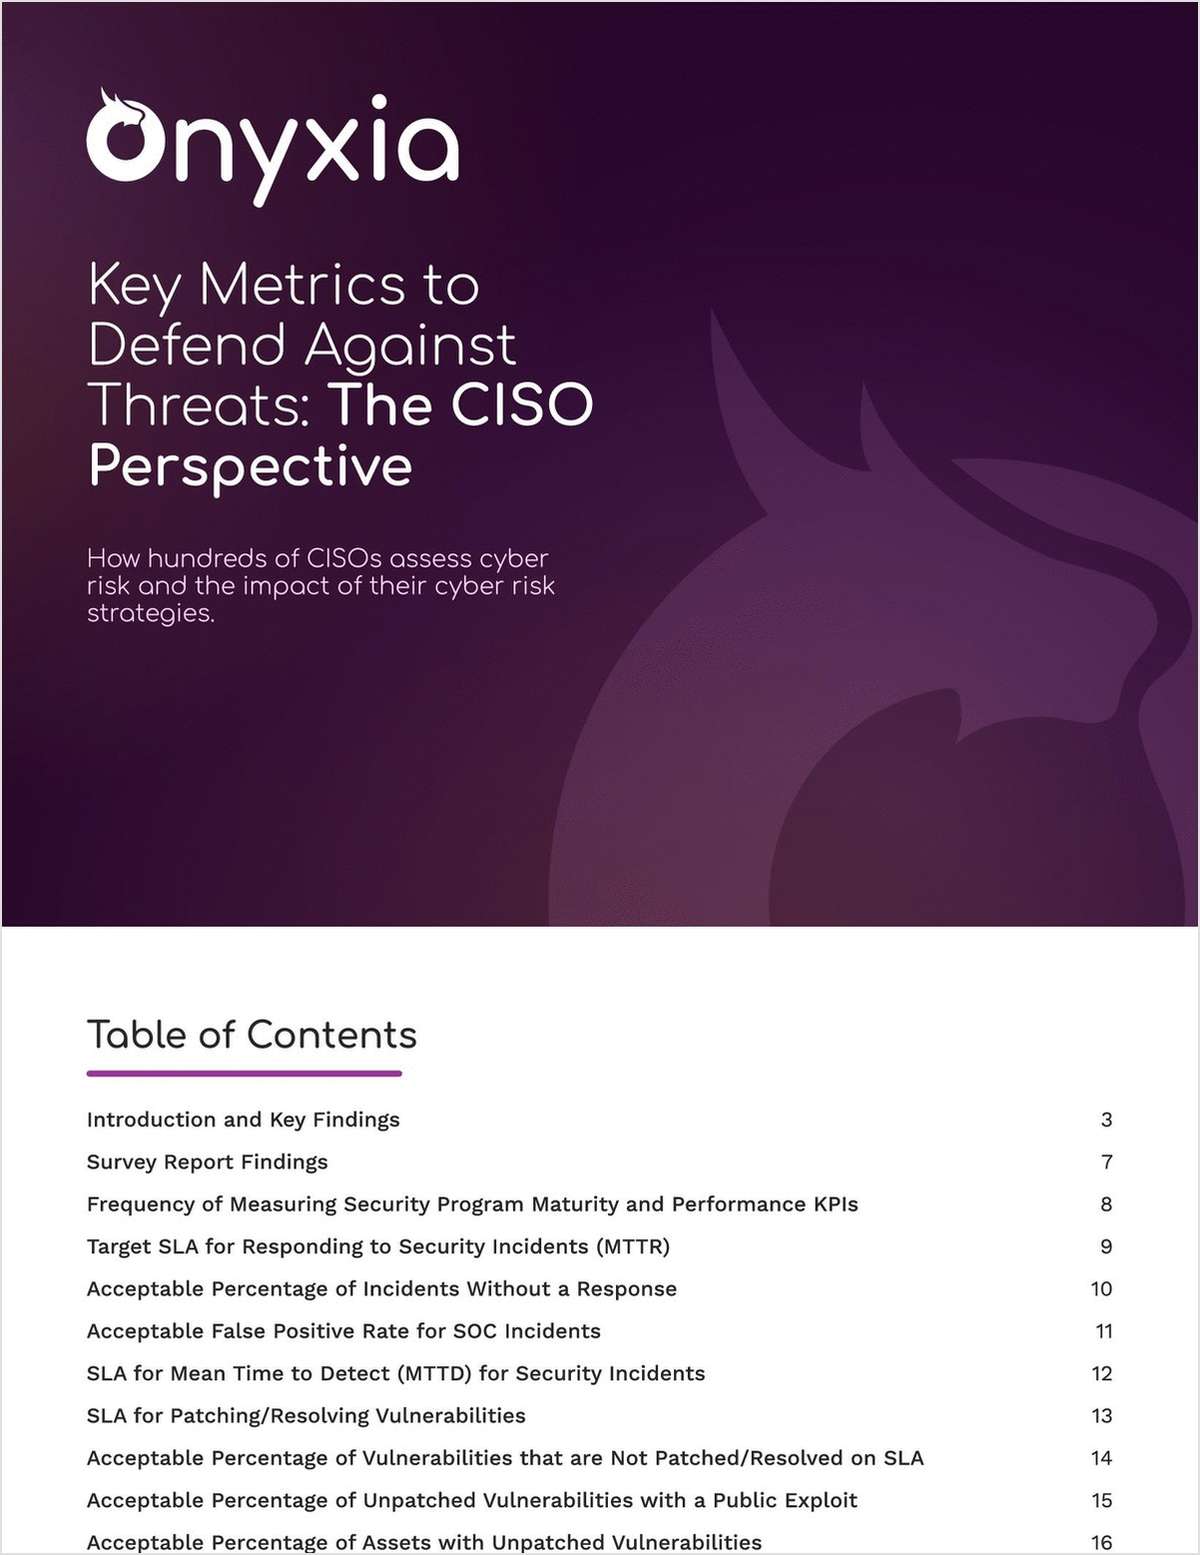 New Research Report from Onyxia: Key Metrics to Defend Against Threats: The CISO Perspective